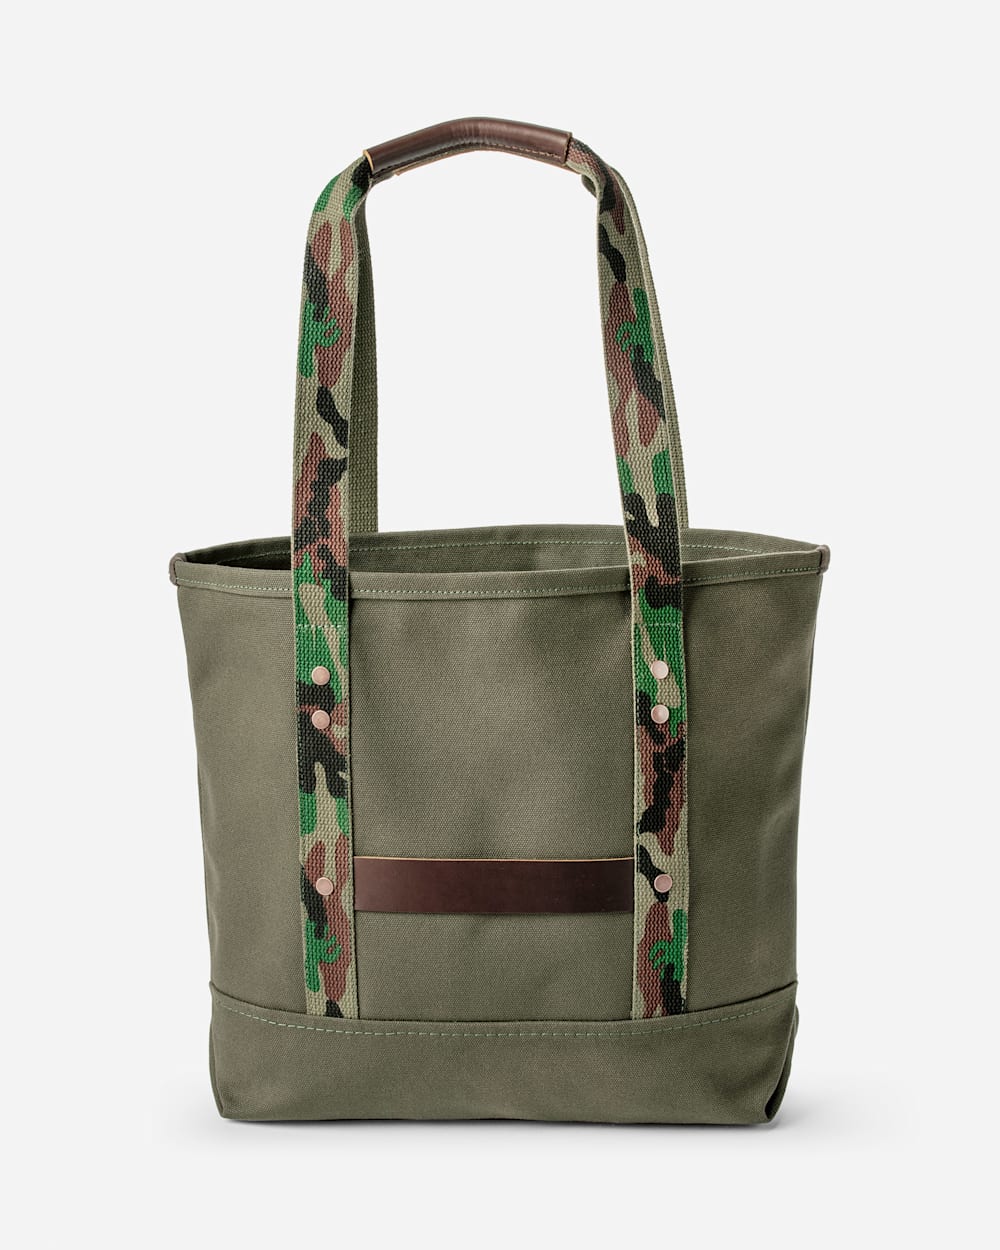 ADDITIONAL VIEW OF COTTON CANVAS TOTE IN PINE image number 3